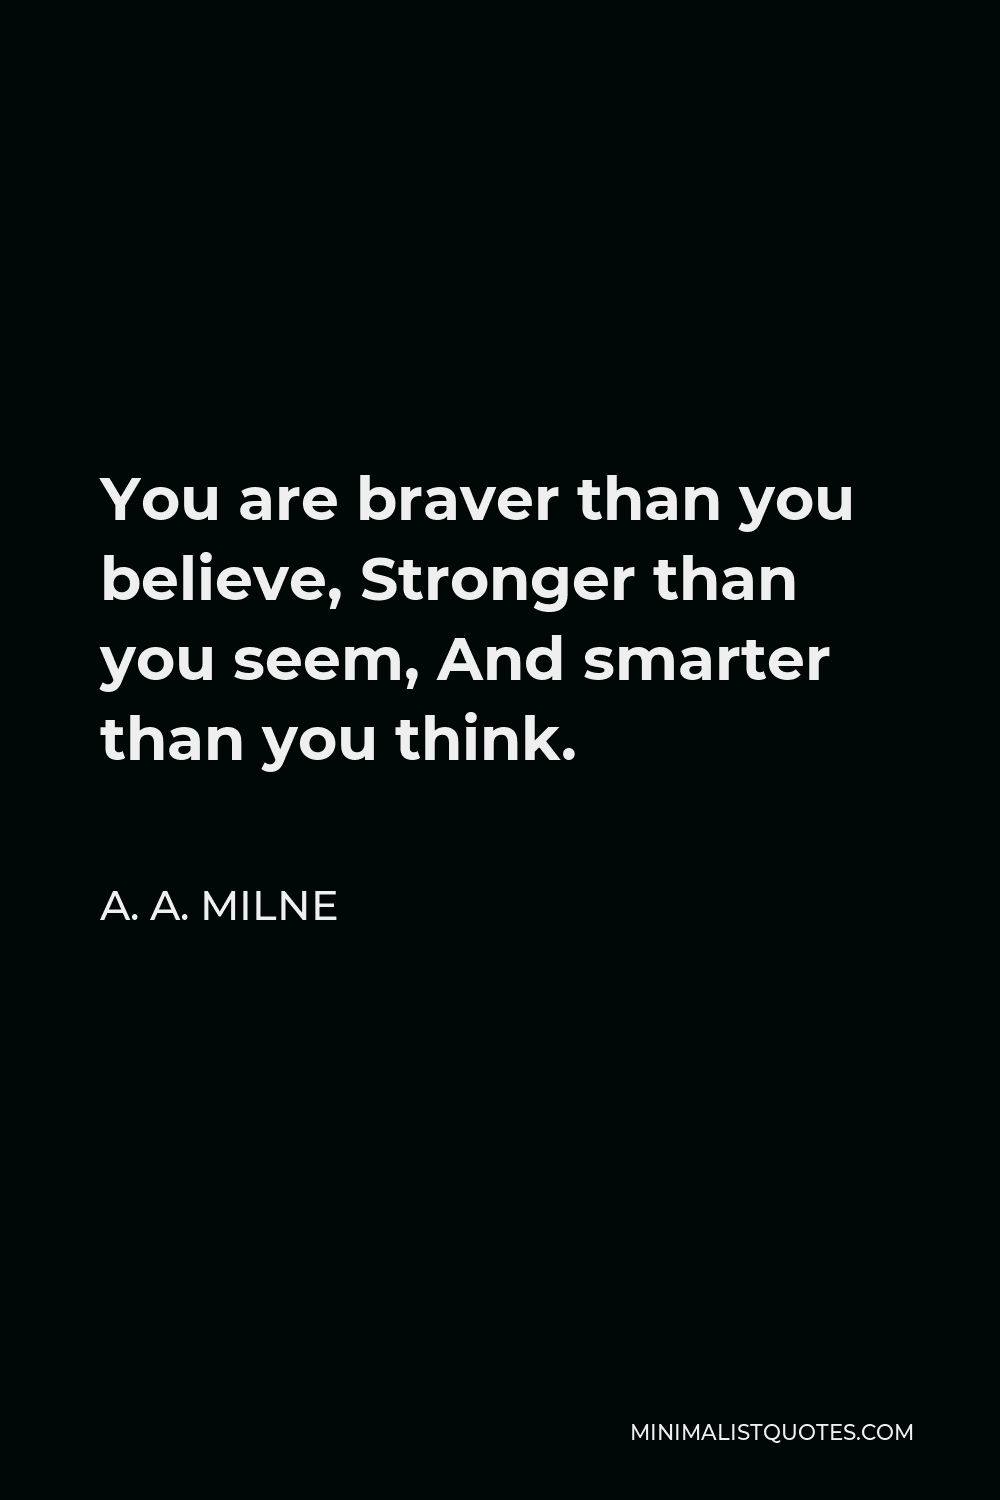 A. A. Milne Quote: You Are Braver Than You Believe, Stronger Than You Seem, And Smarter Than You Think.